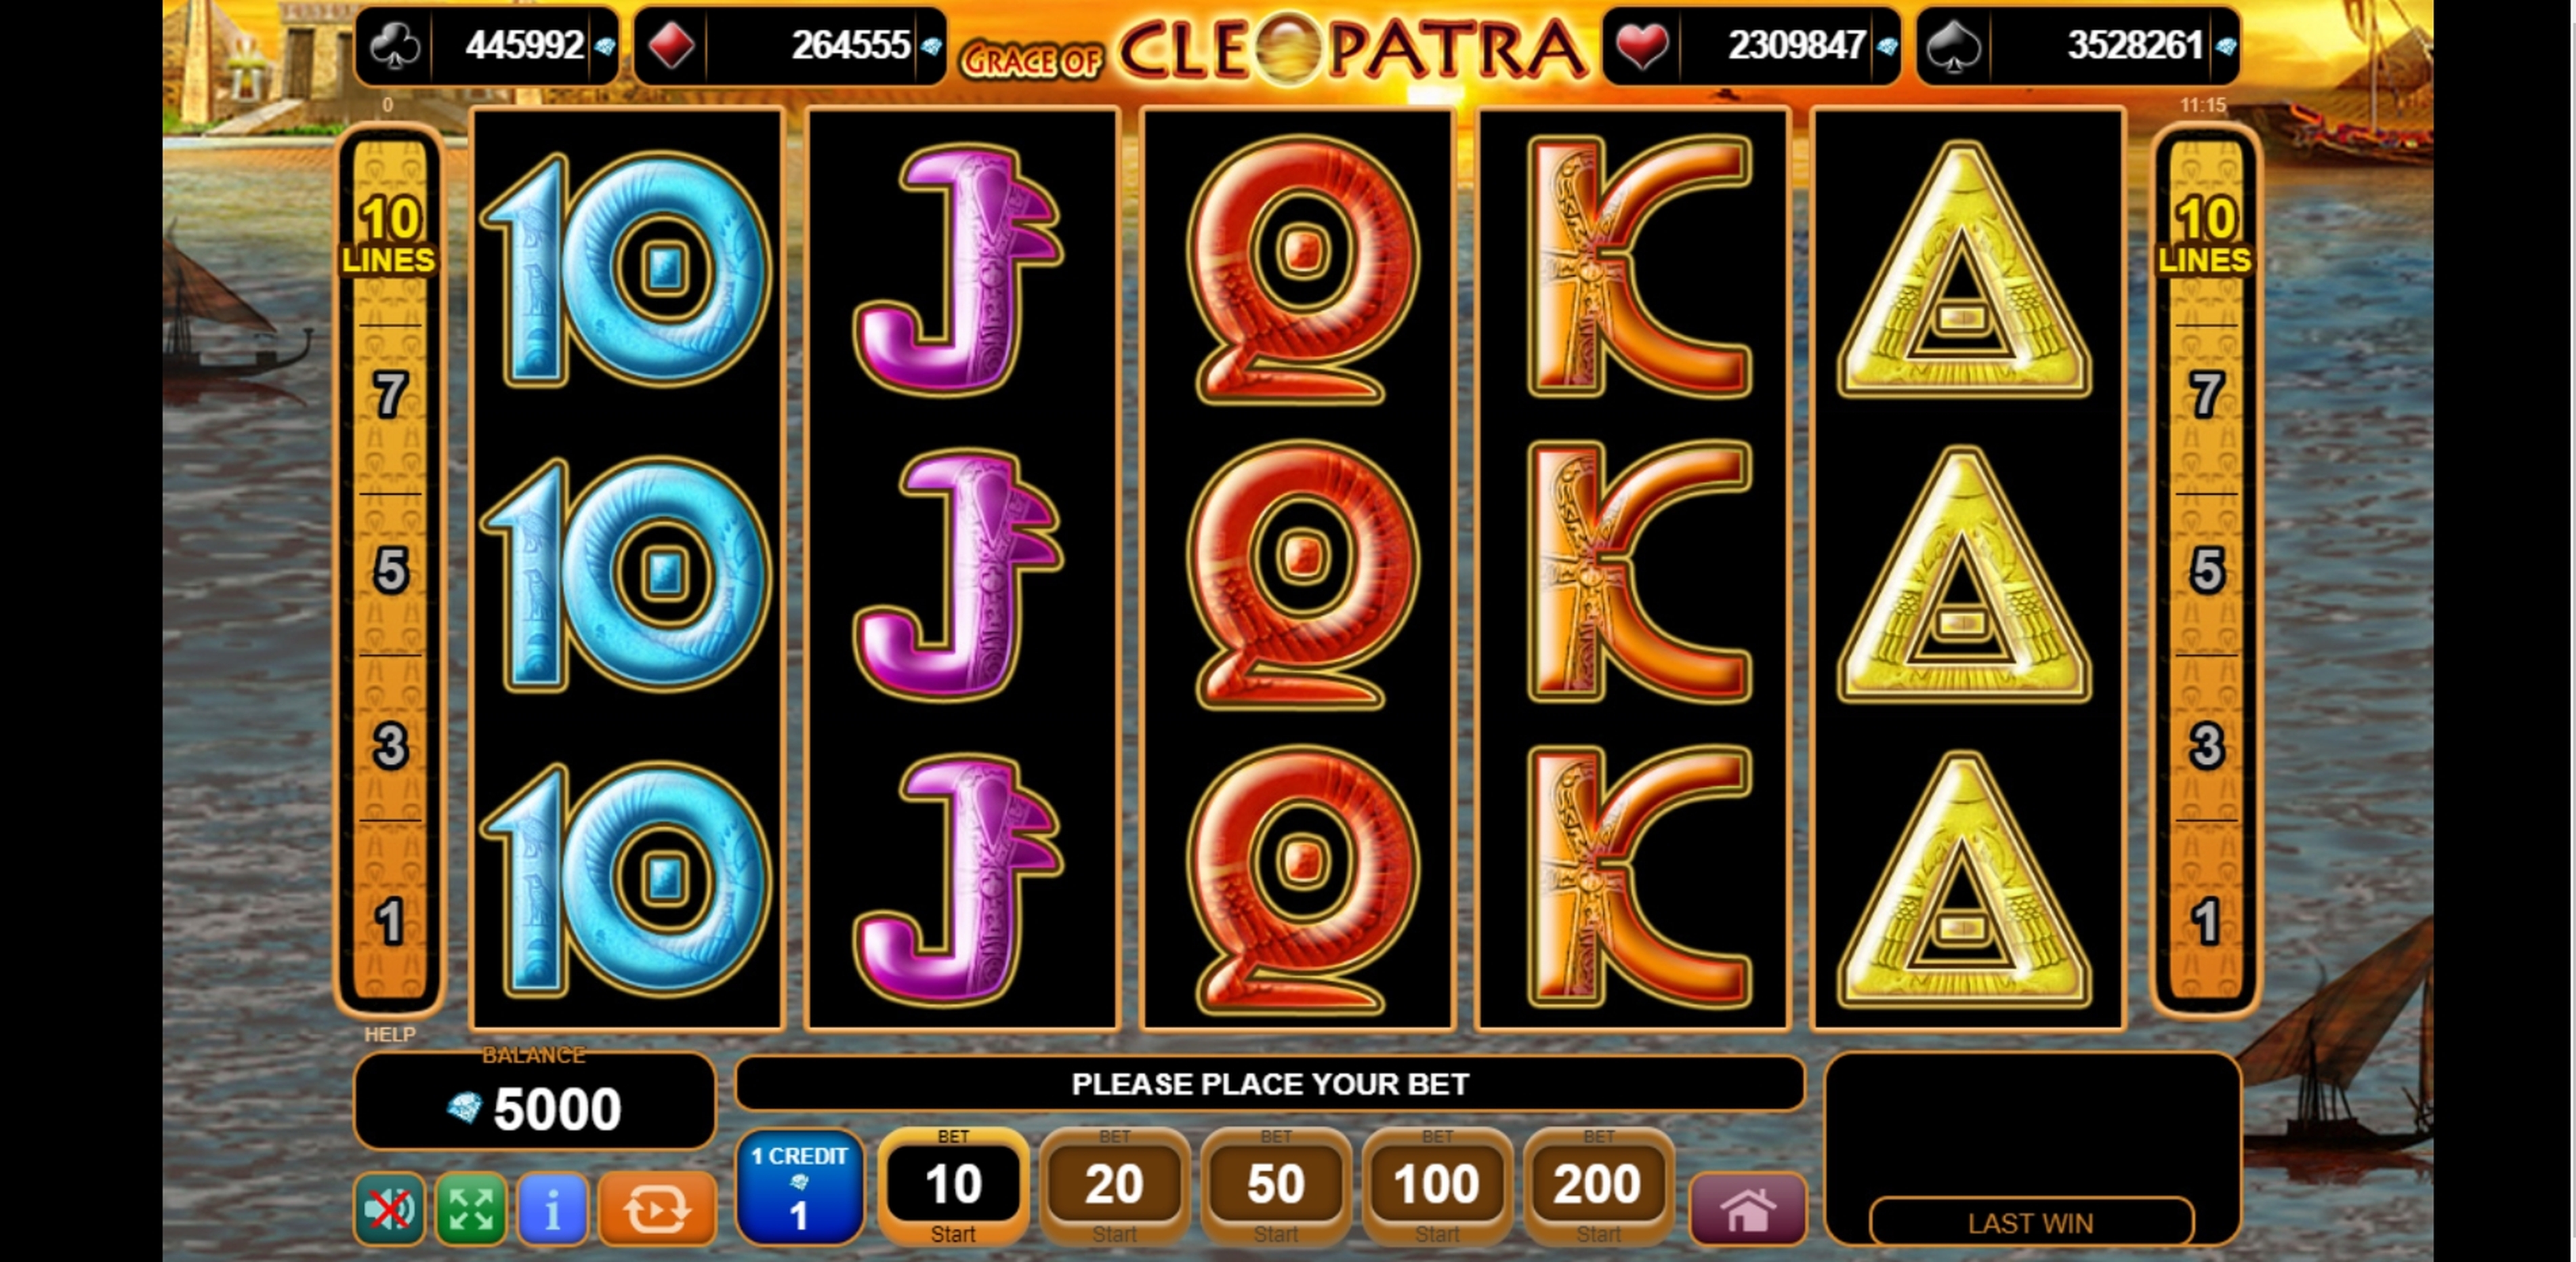 Reels in Grace of Cleopatra Slot Game by EGT